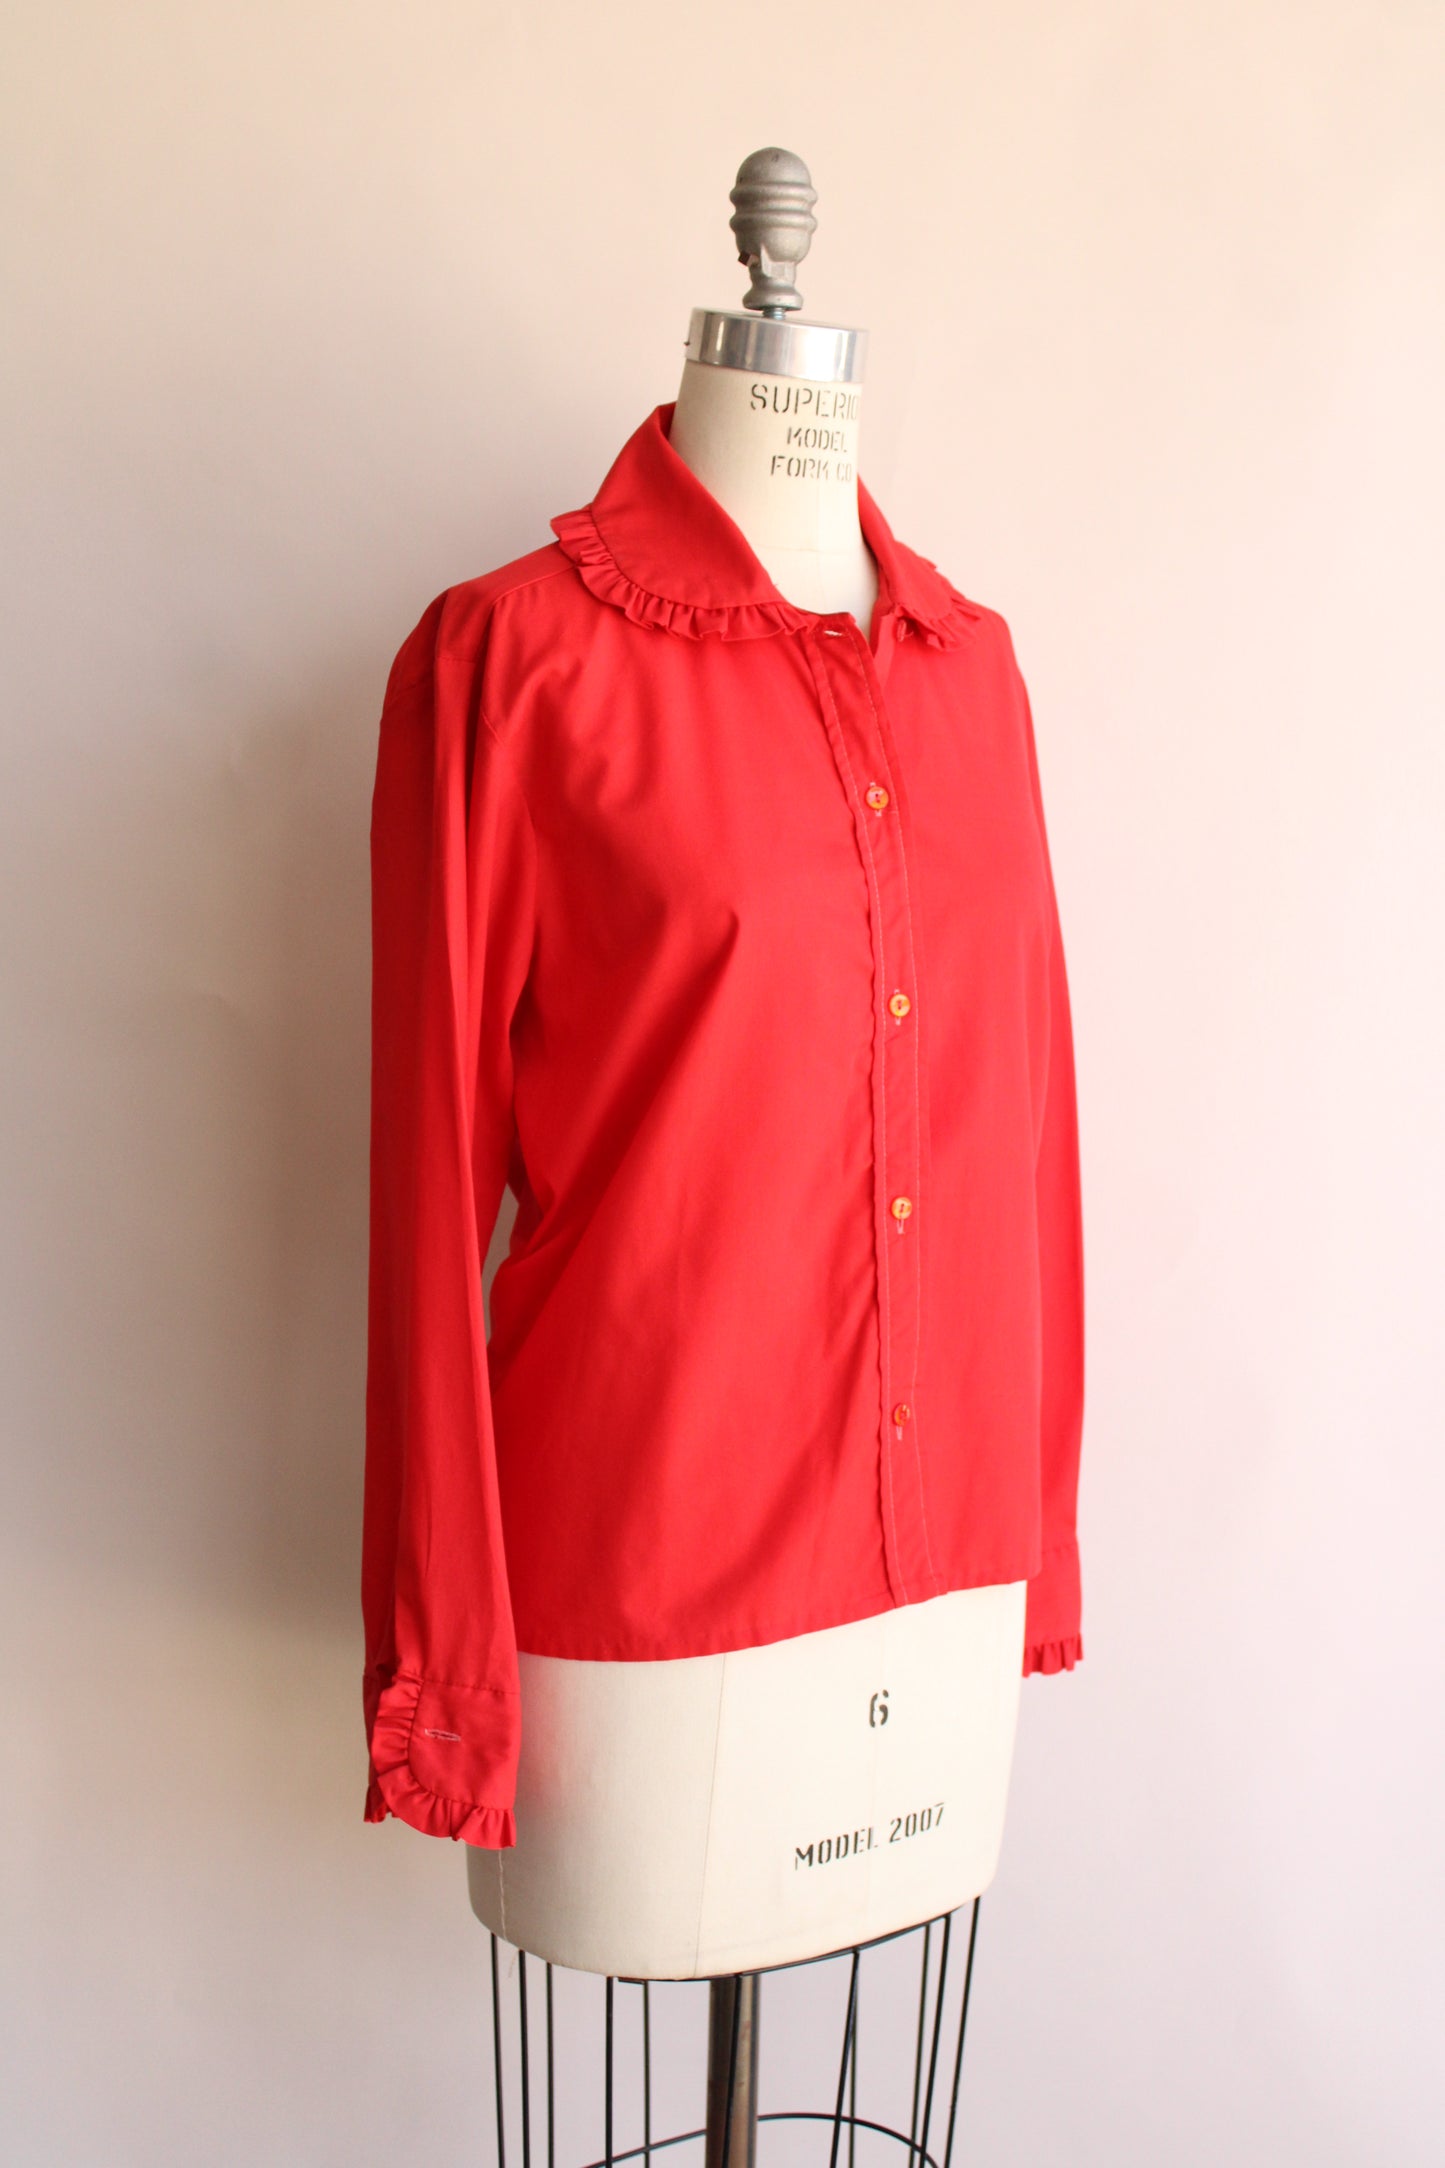 Vintage 1970s Lady Marlboro Red Button Up Shirt with Ruffled Collar